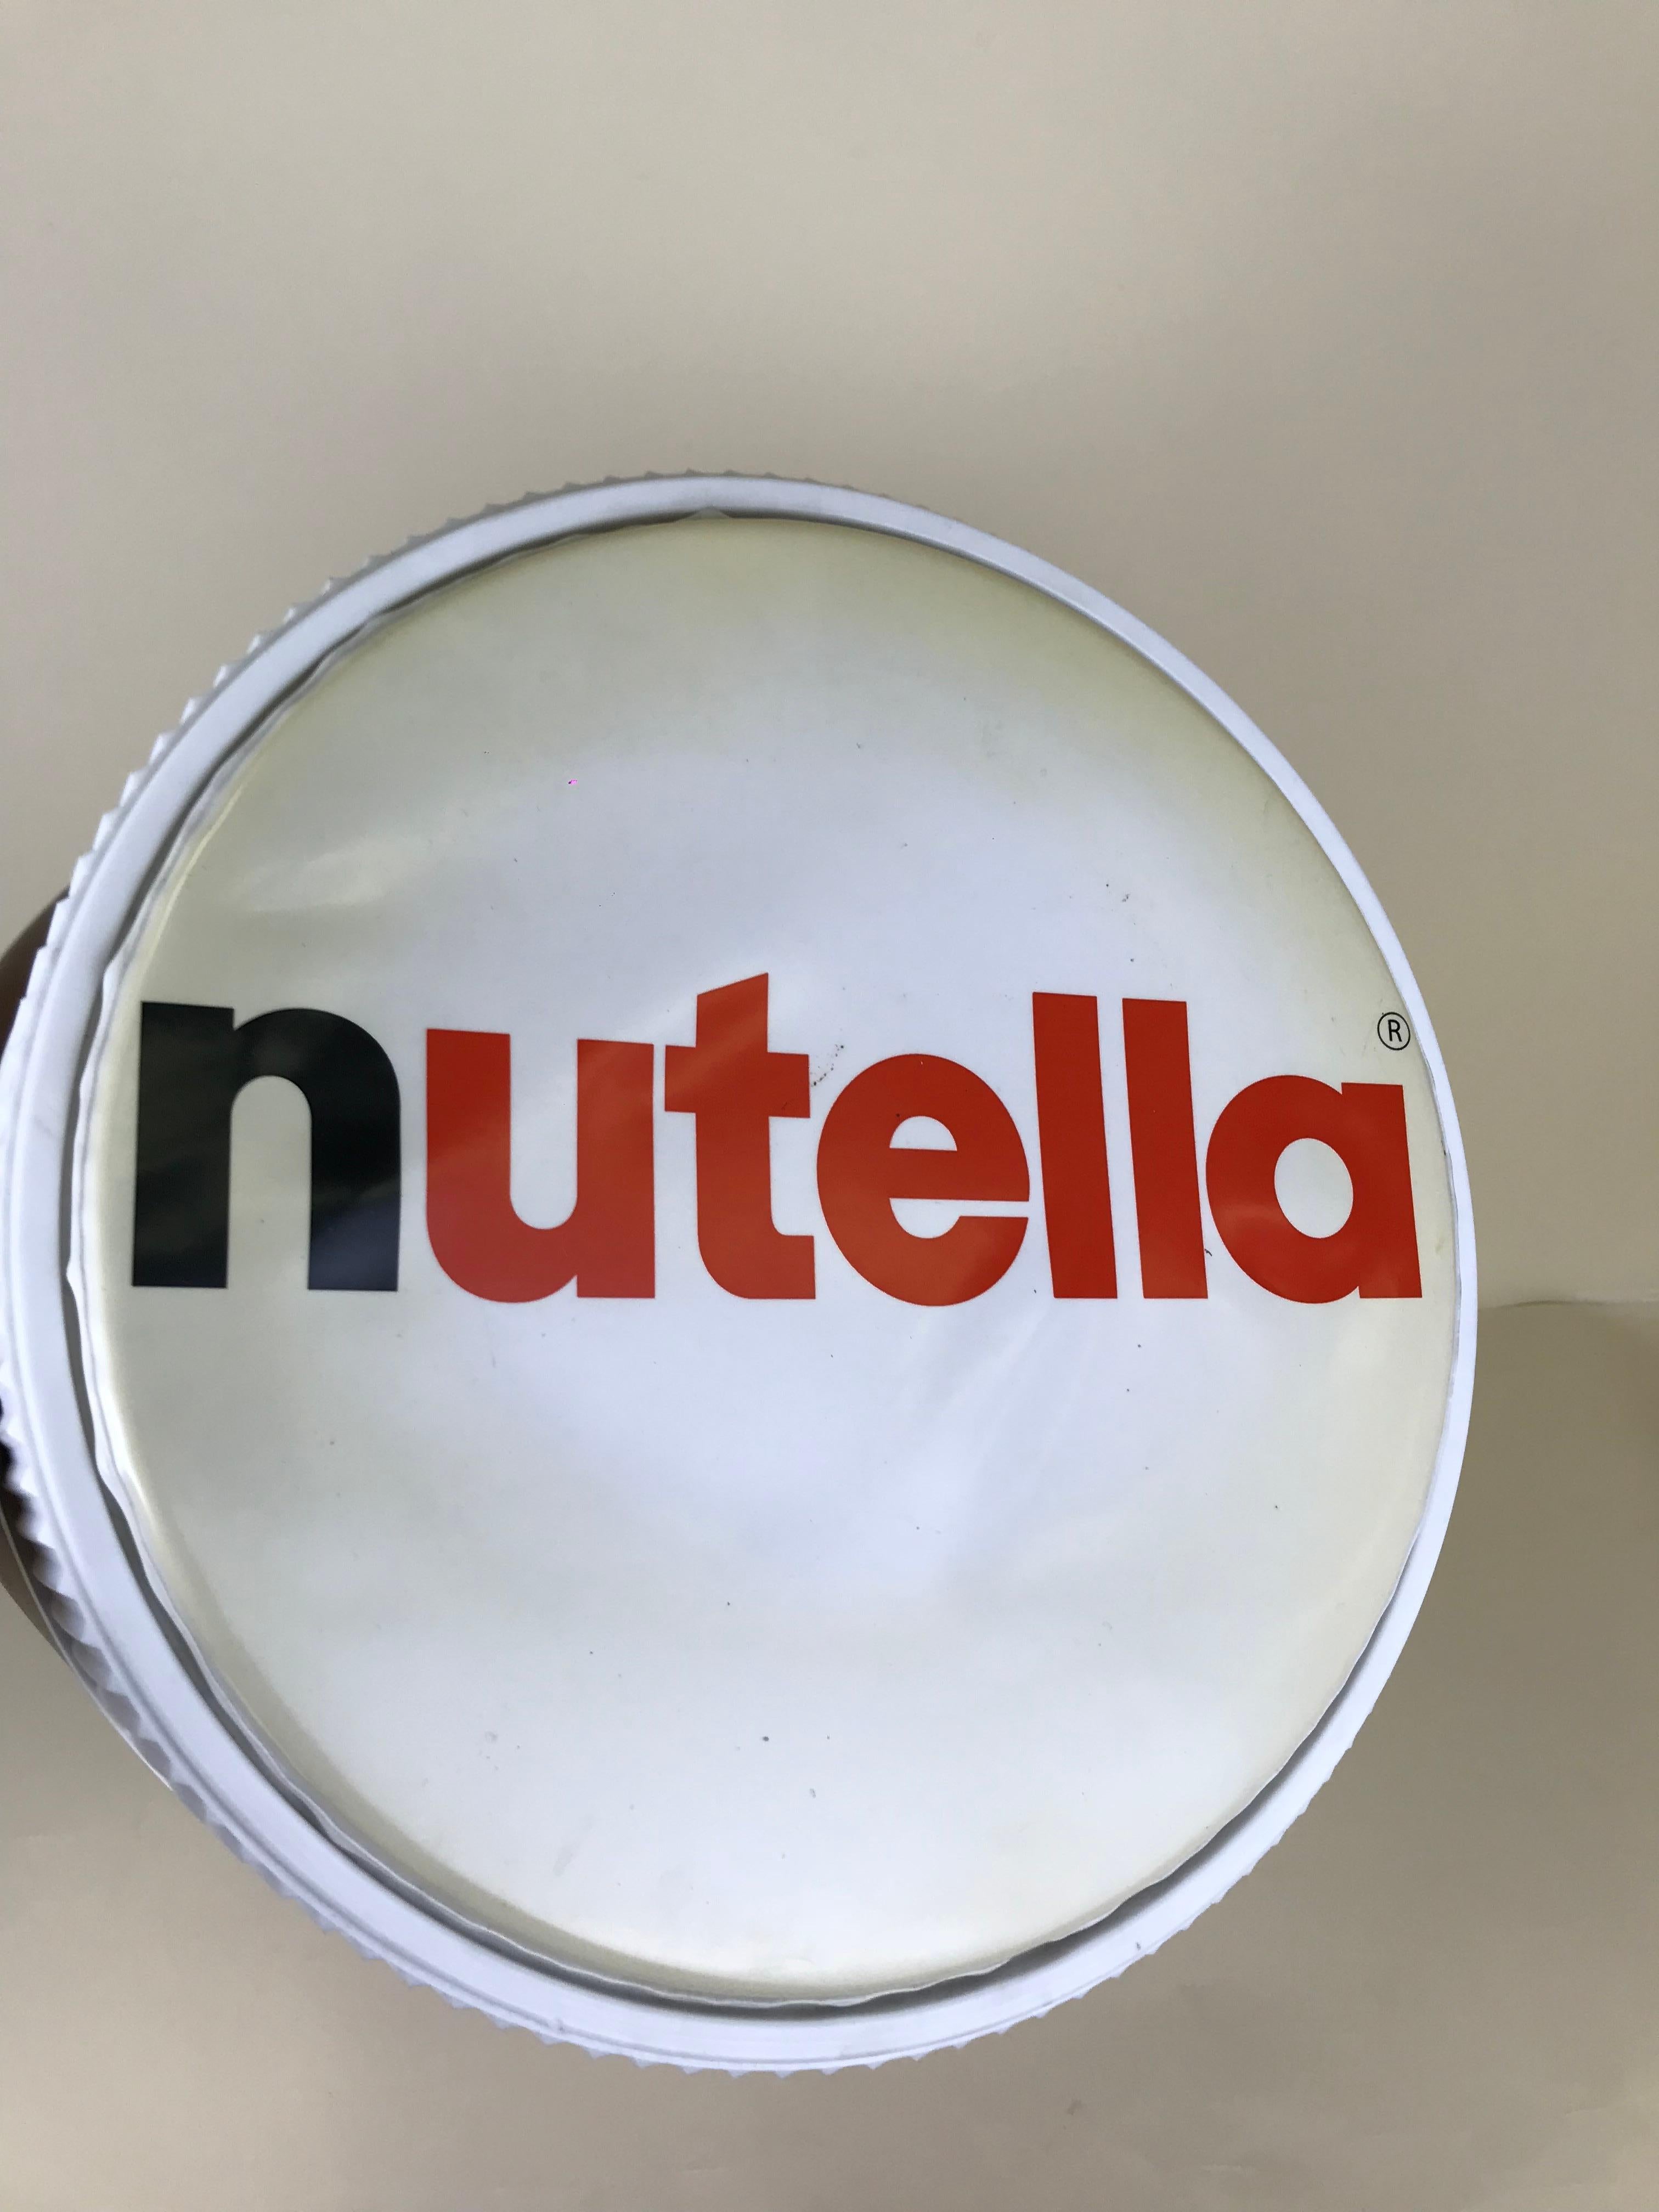 Italian 1980s Vintage Plastic Ferrero Nutella Stool with Pillow Top Made in Italy